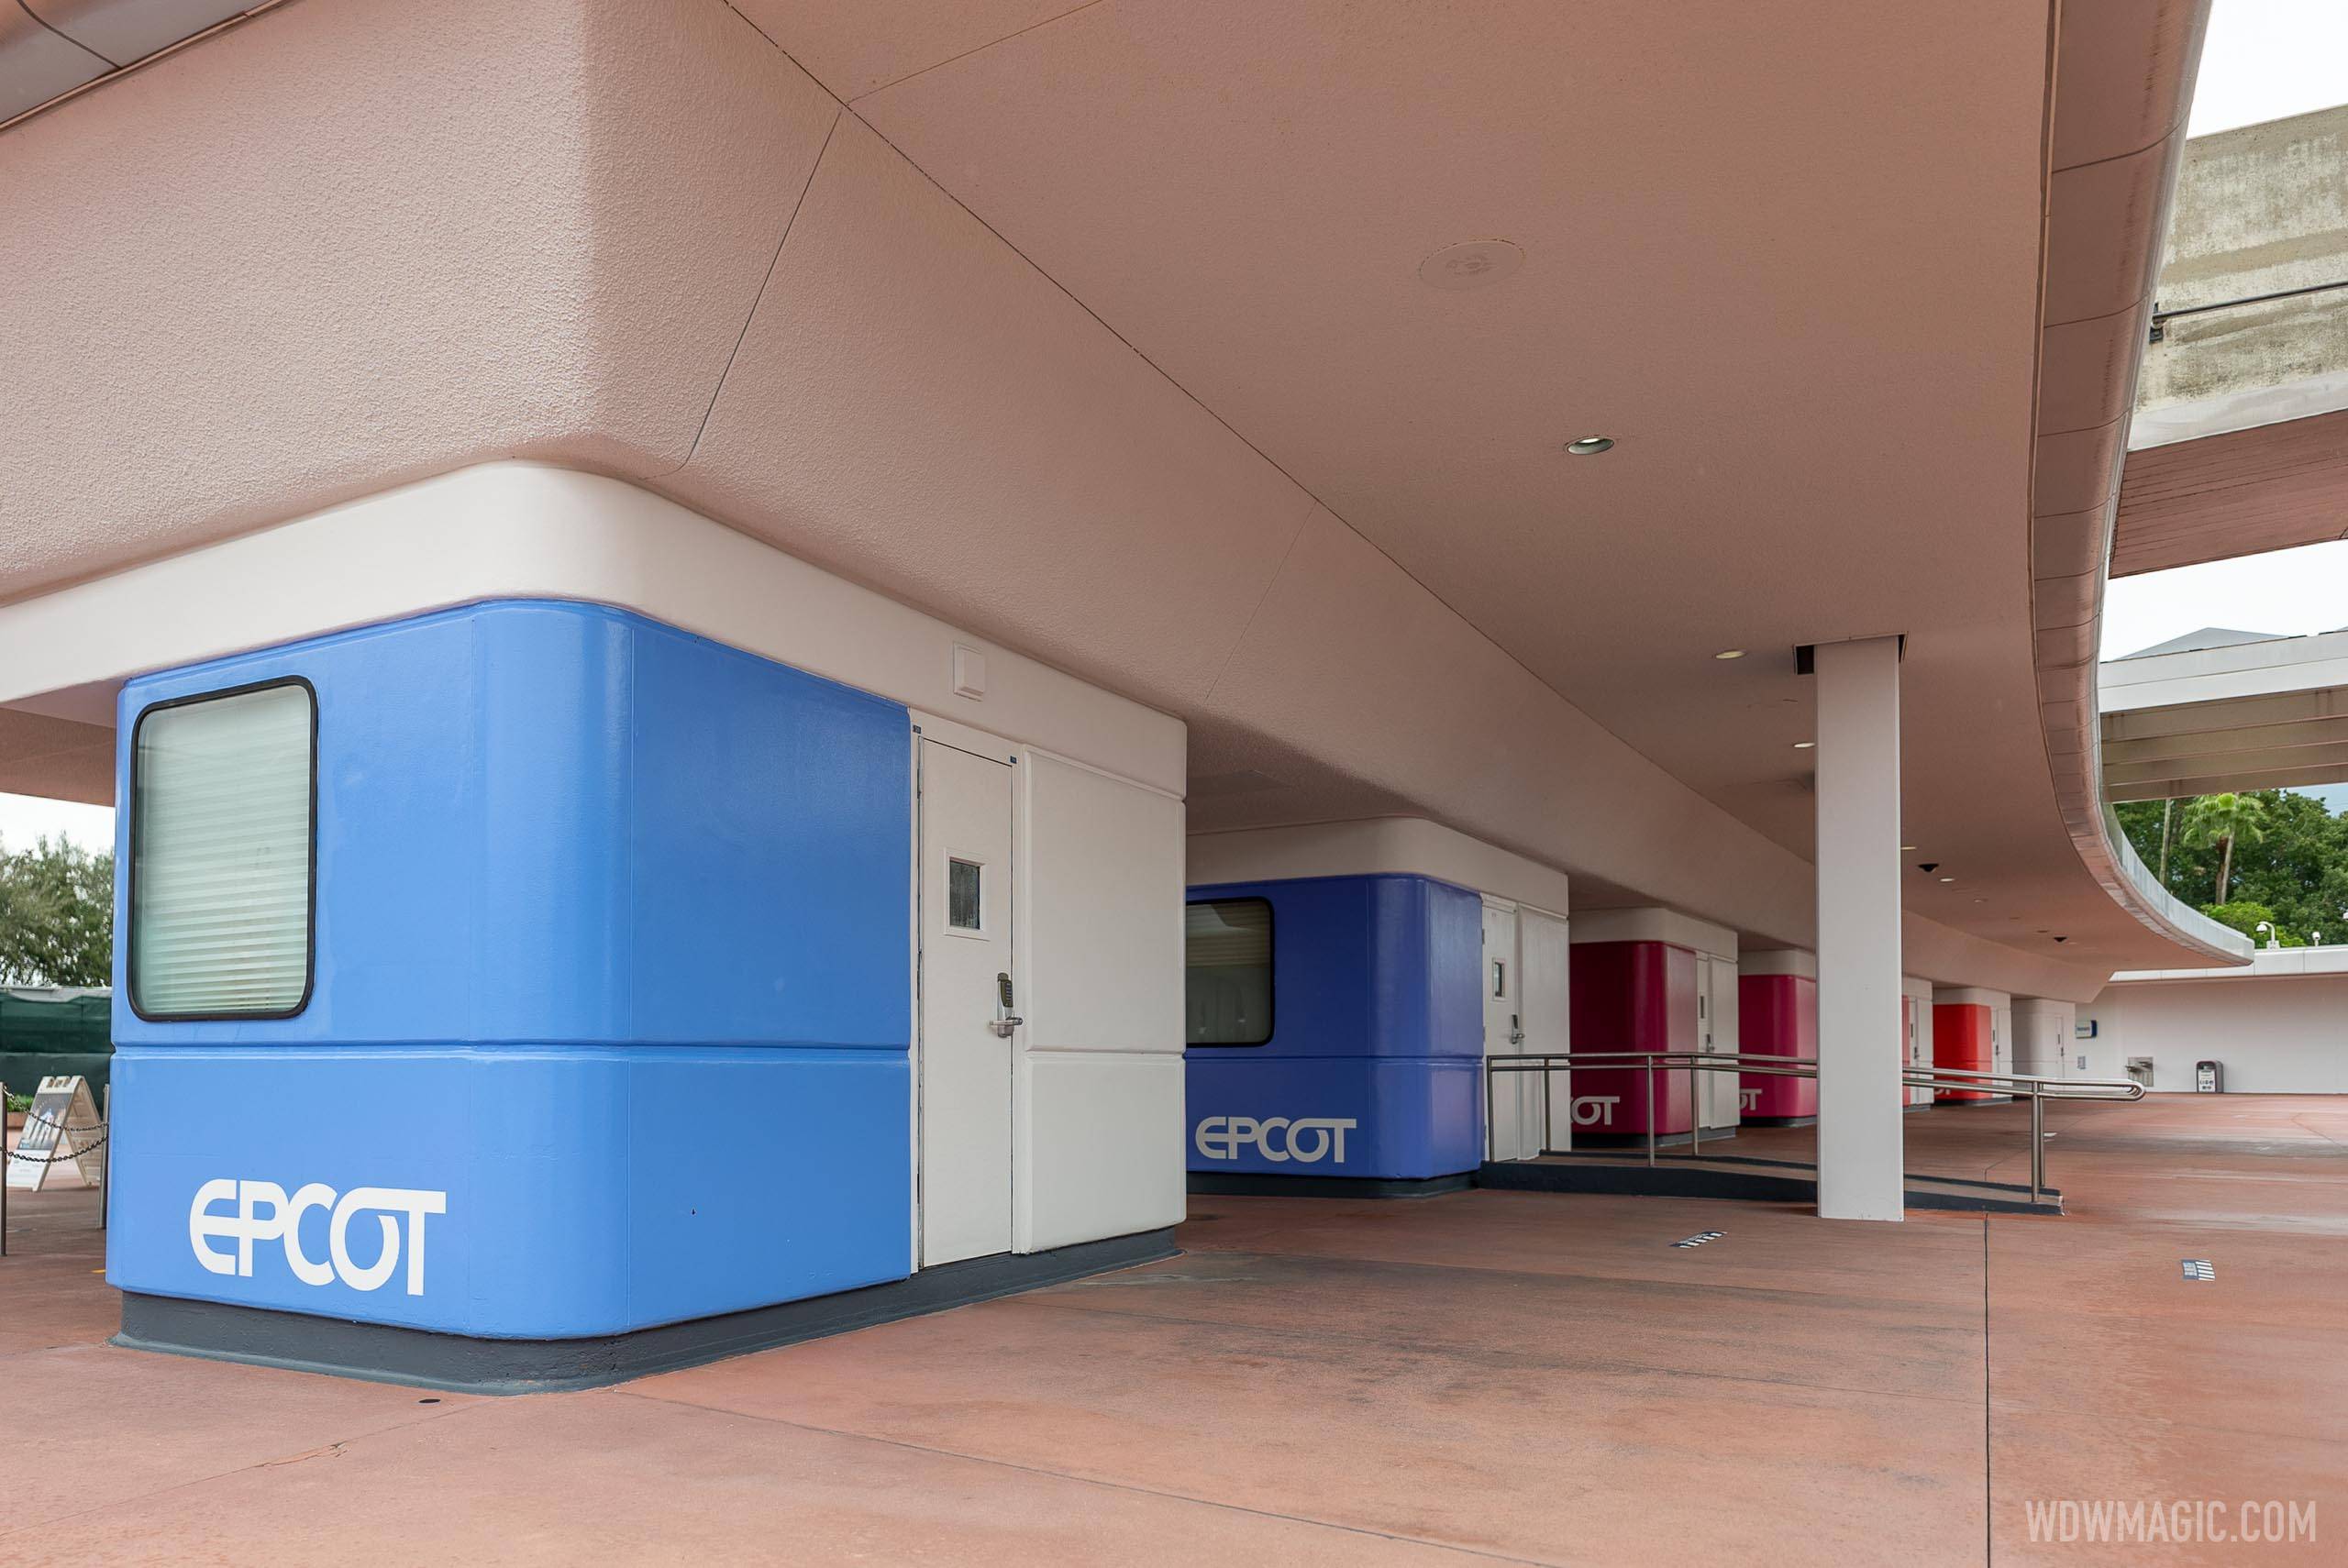 PHOTOS - EPCOT logos added to the main entrance ticket booths